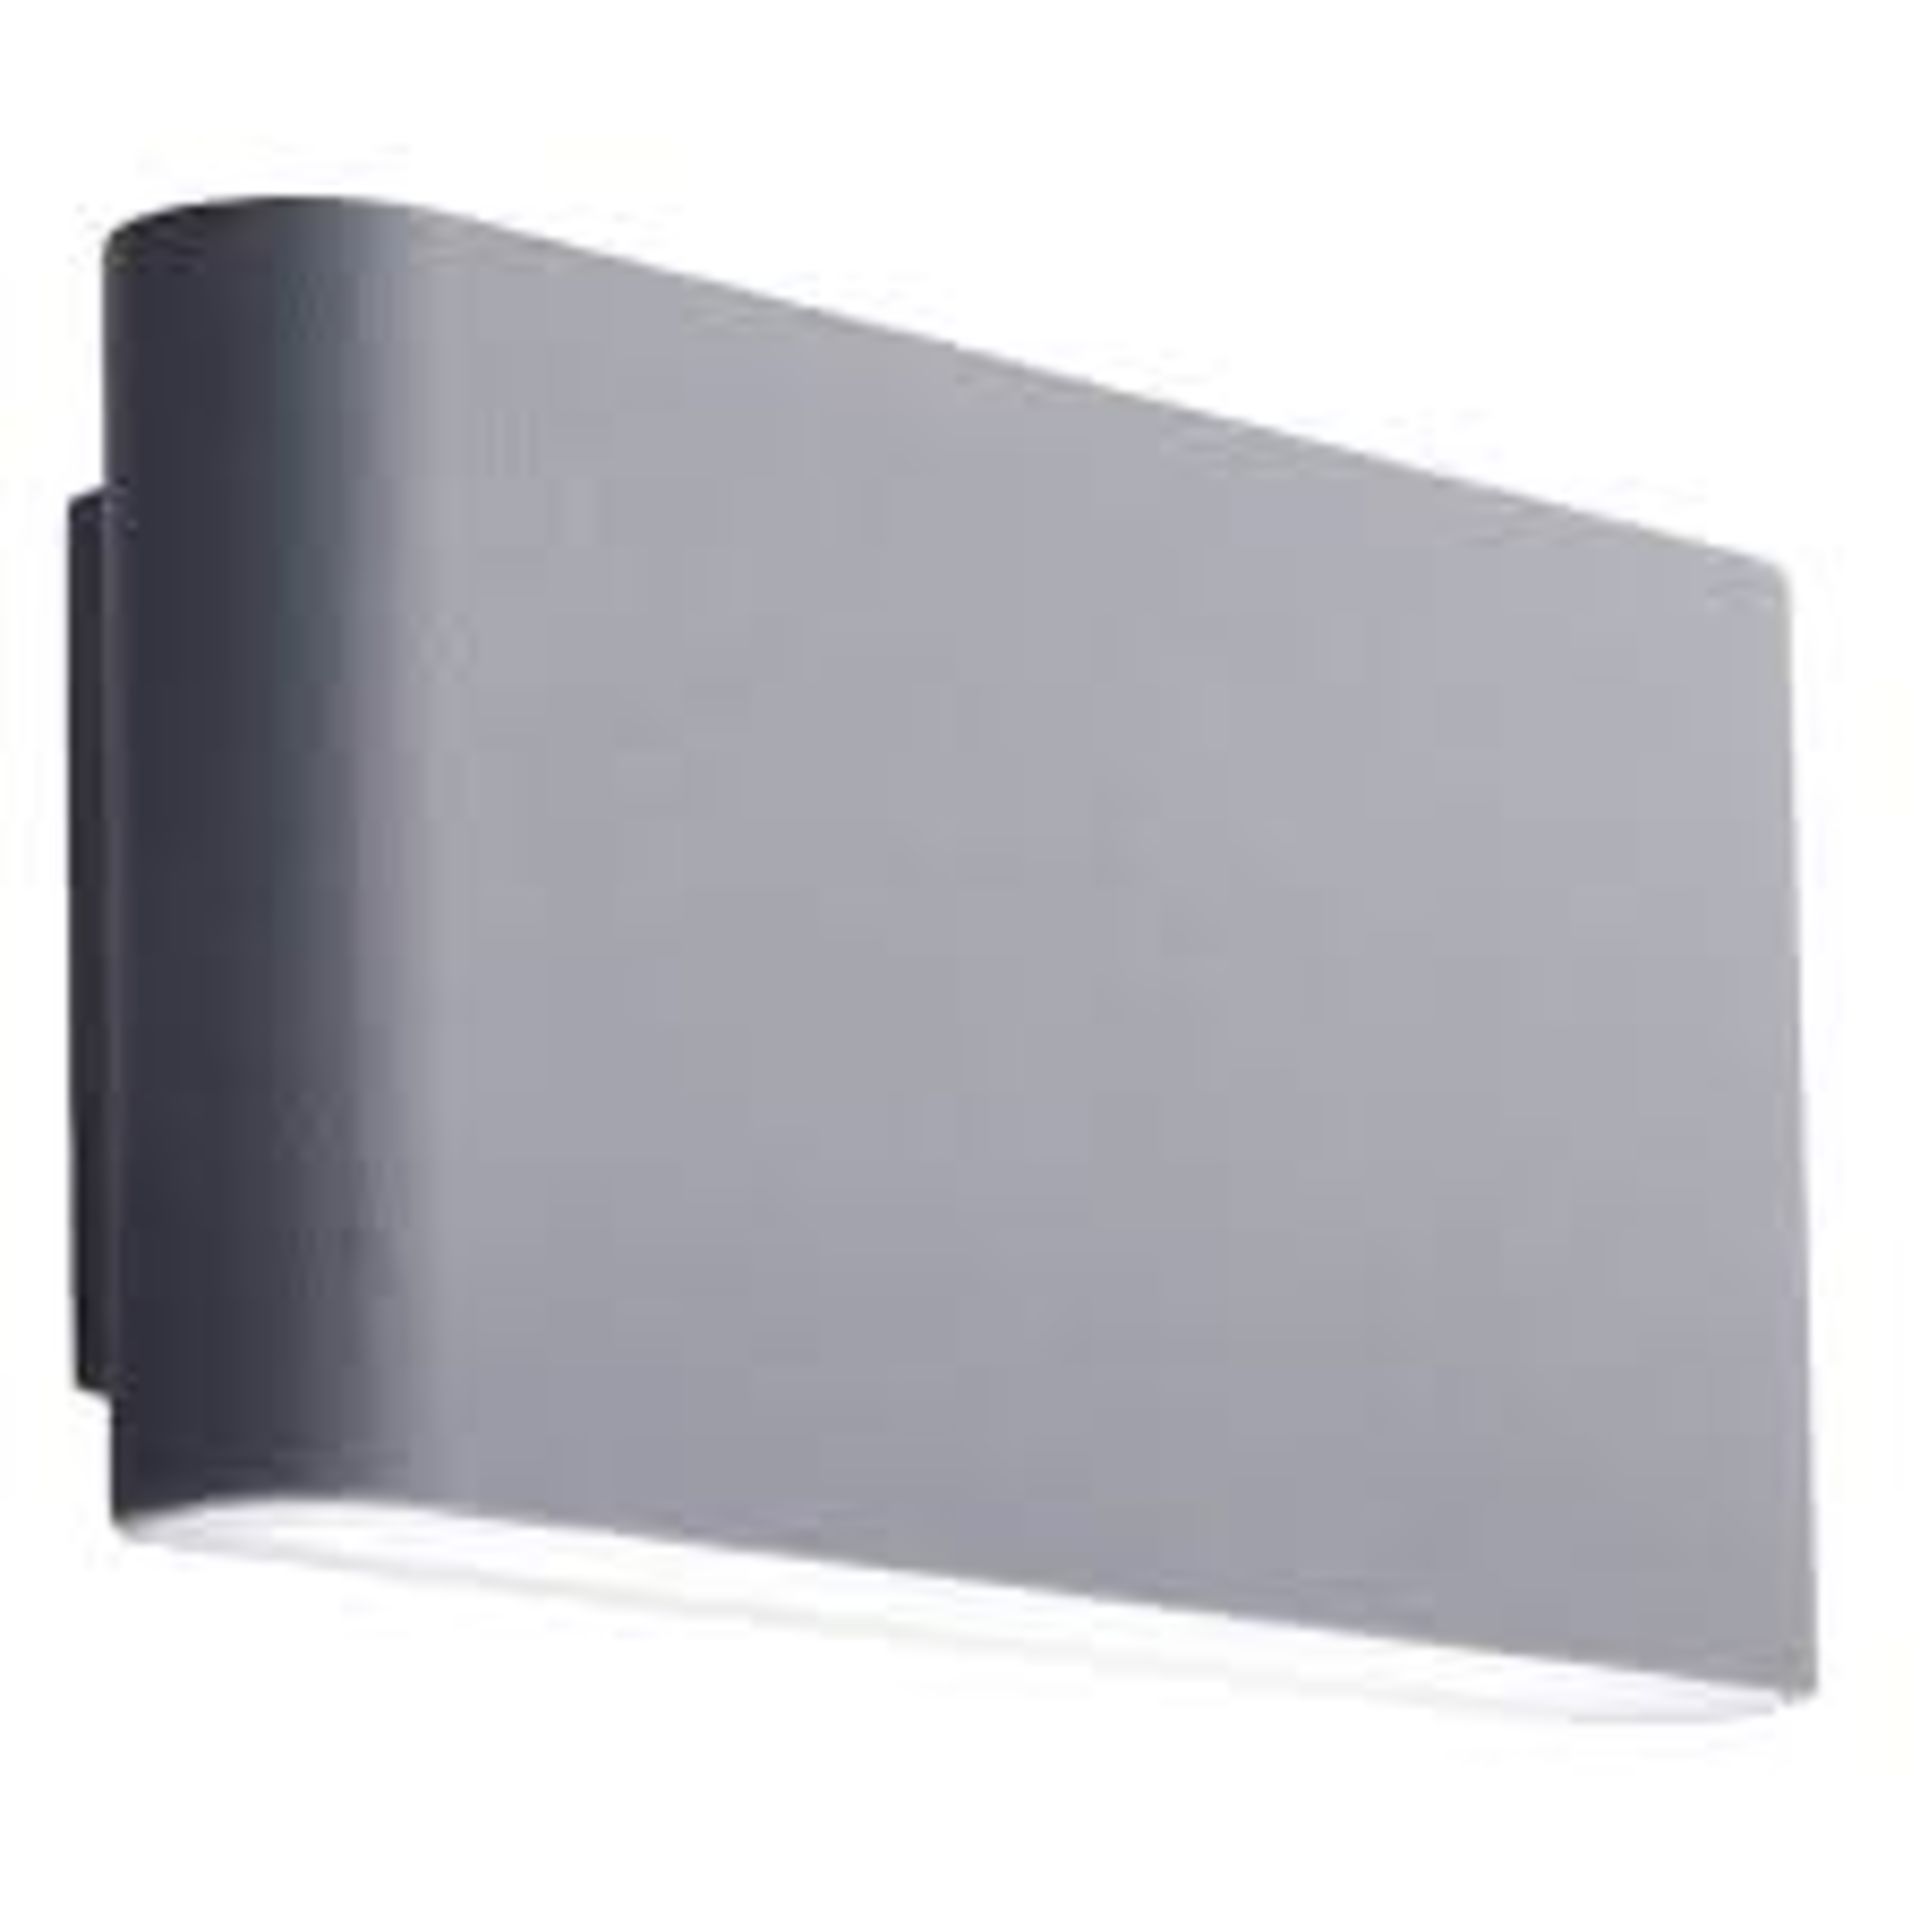 1 x Searchlight LED Outdoor Aluminium Wall Bracket - Ref: 2562GY - New and Boxed - RRP: £70 - Image 4 of 4